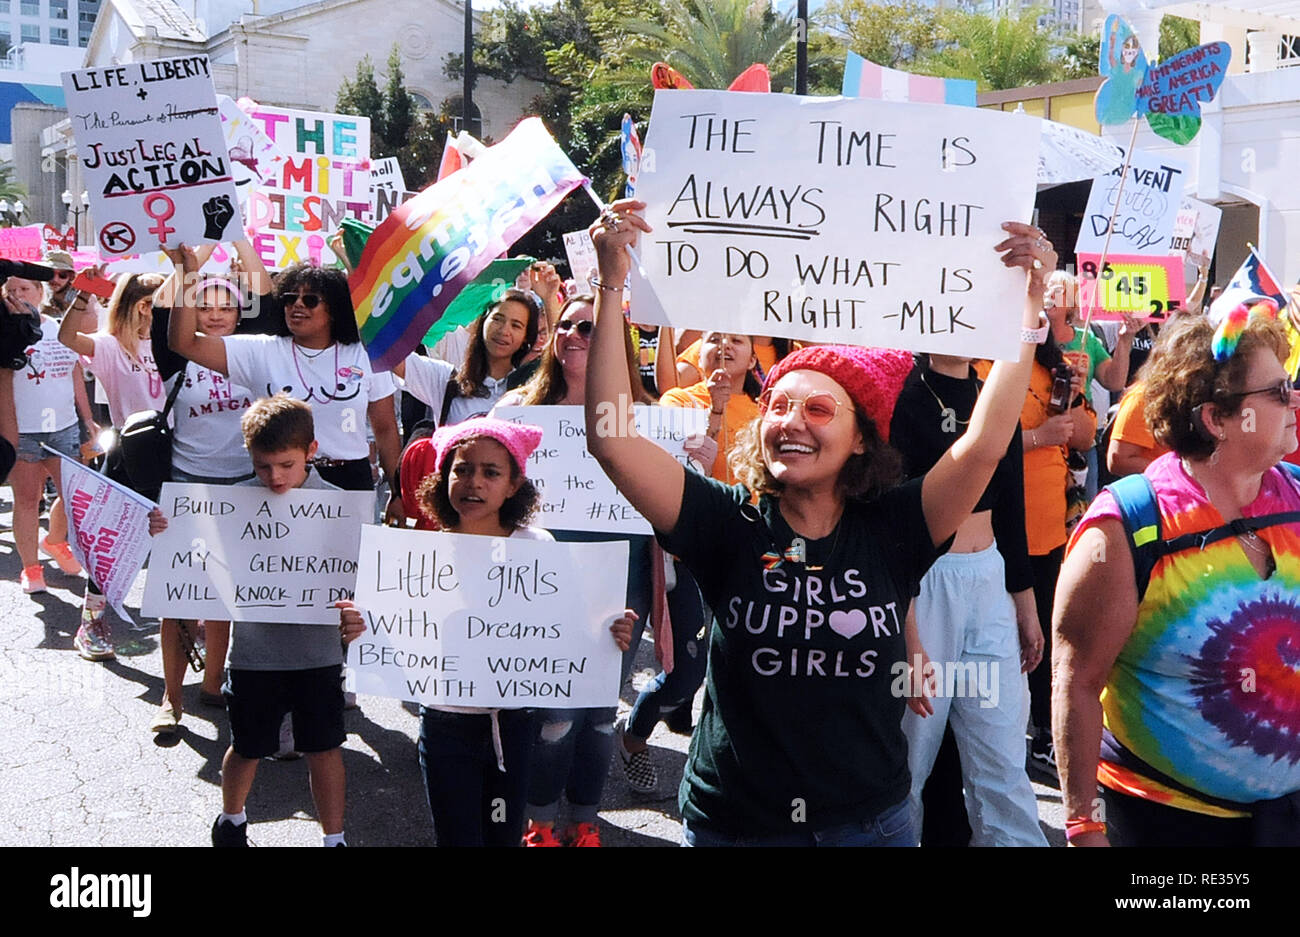 Florida, USA. 19th Jan 2019.  Protesters carry signs in the third annual Women's March on January 19, 2019 in Orlando, Florida. (Paul Hennessy/Alamy) Credit: Paul Hennessy/Alamy Live News Stock Photo